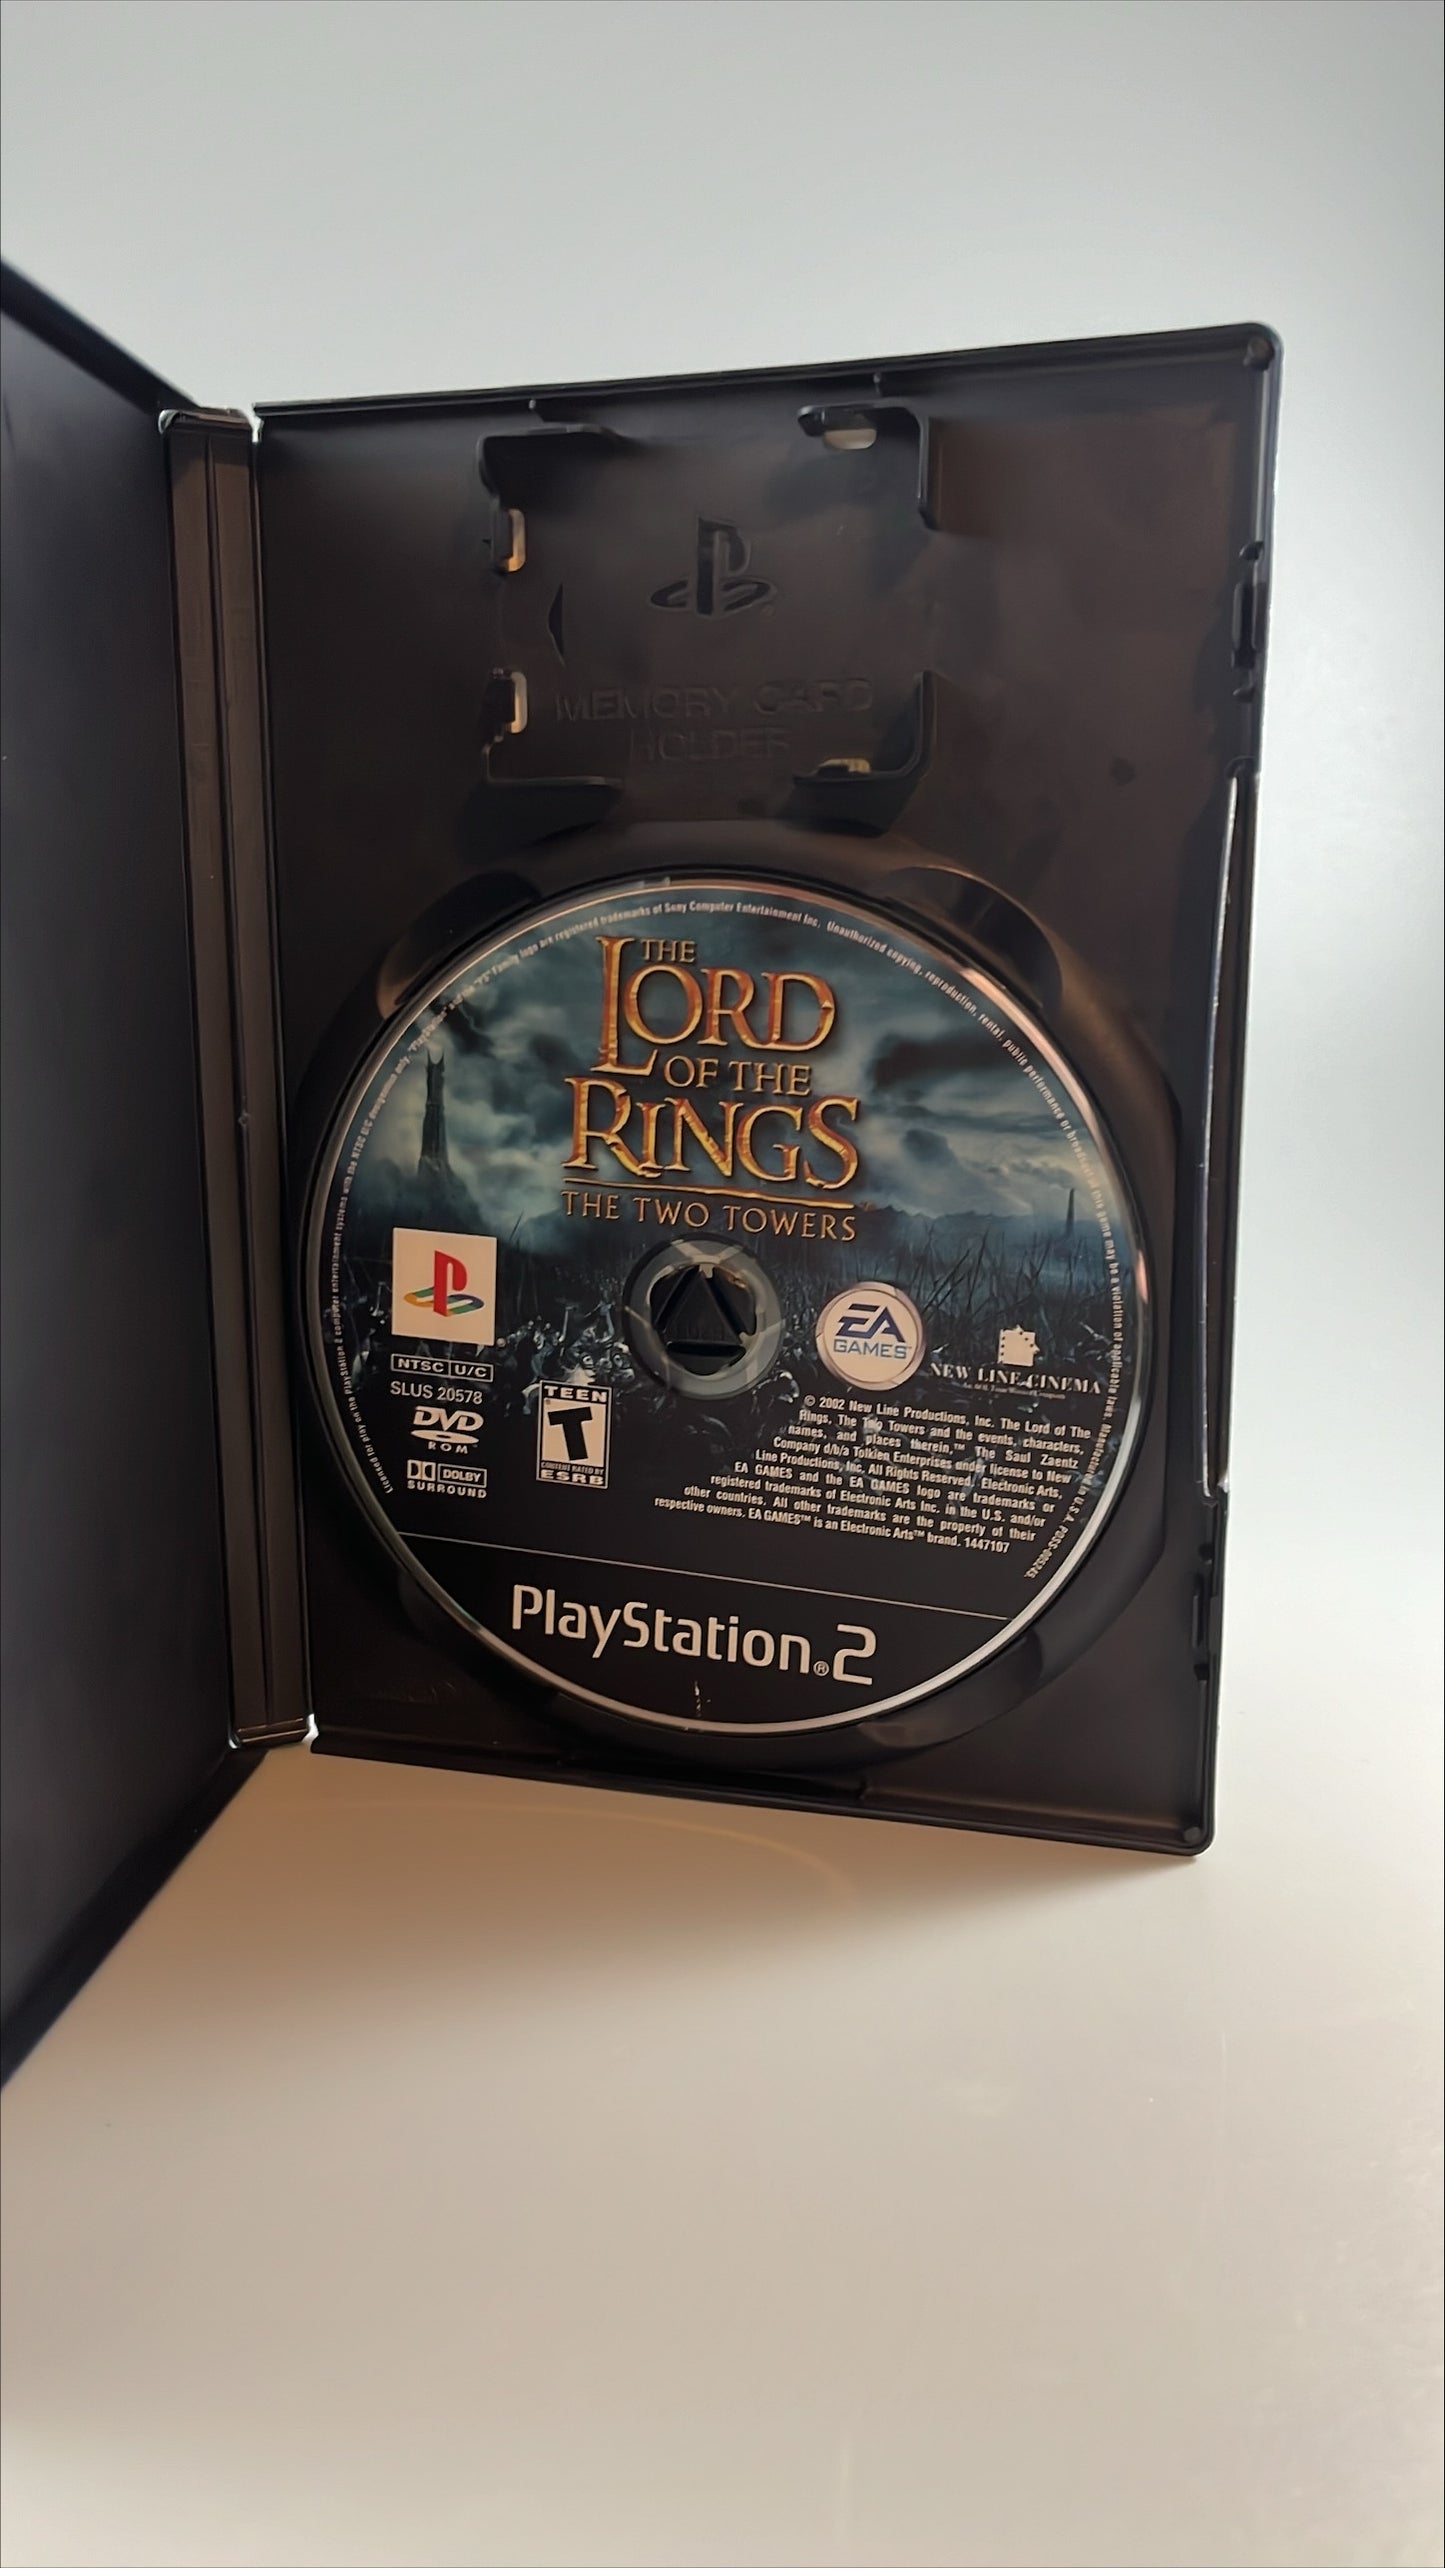 The Lord of the Rings: The Two Towers (No Manual)